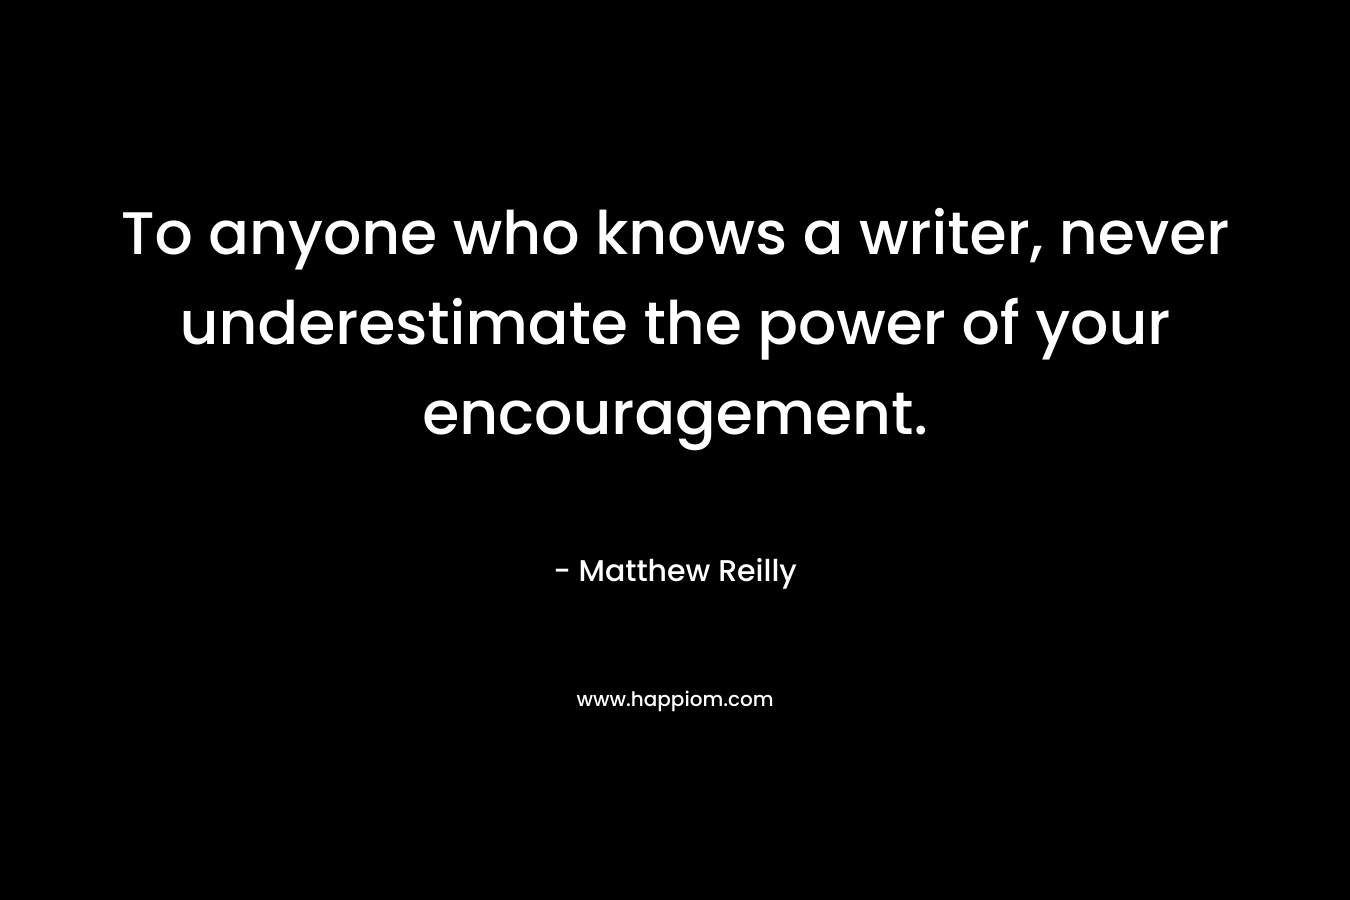 To anyone who knows a writer, never underestimate the power of your encouragement. – Matthew Reilly